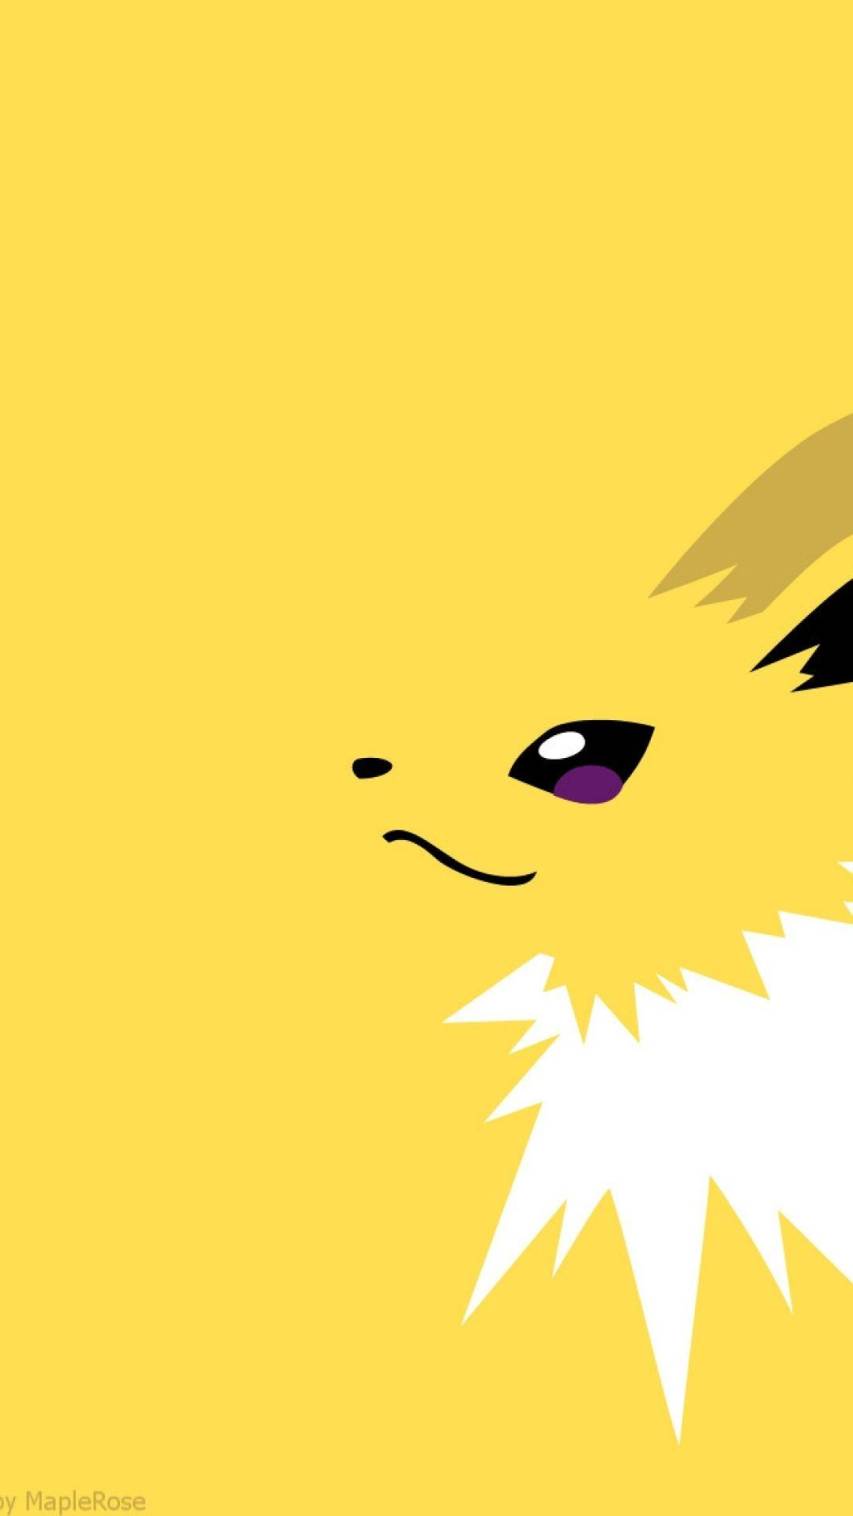 A yellow and black pikachu with white spots on its face - Pokemon